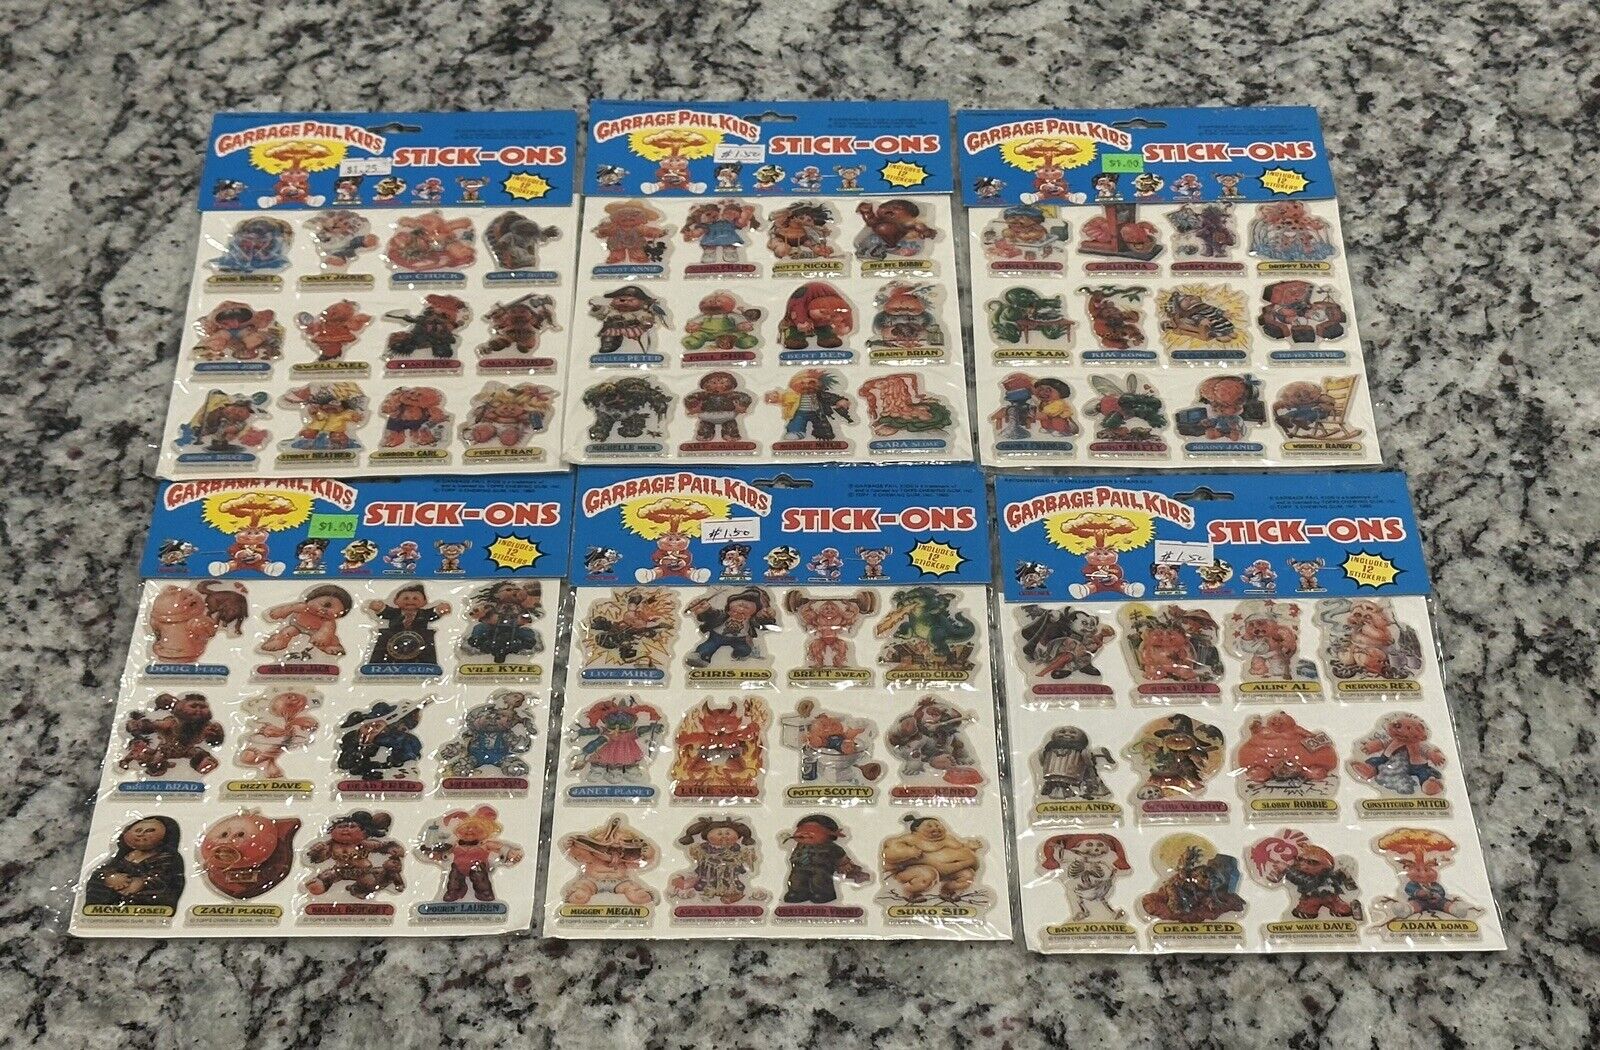 GARBAGE PAIL KIDS 1986 PUFFY STICK ONS COMPLETE SET of 6 -RARE